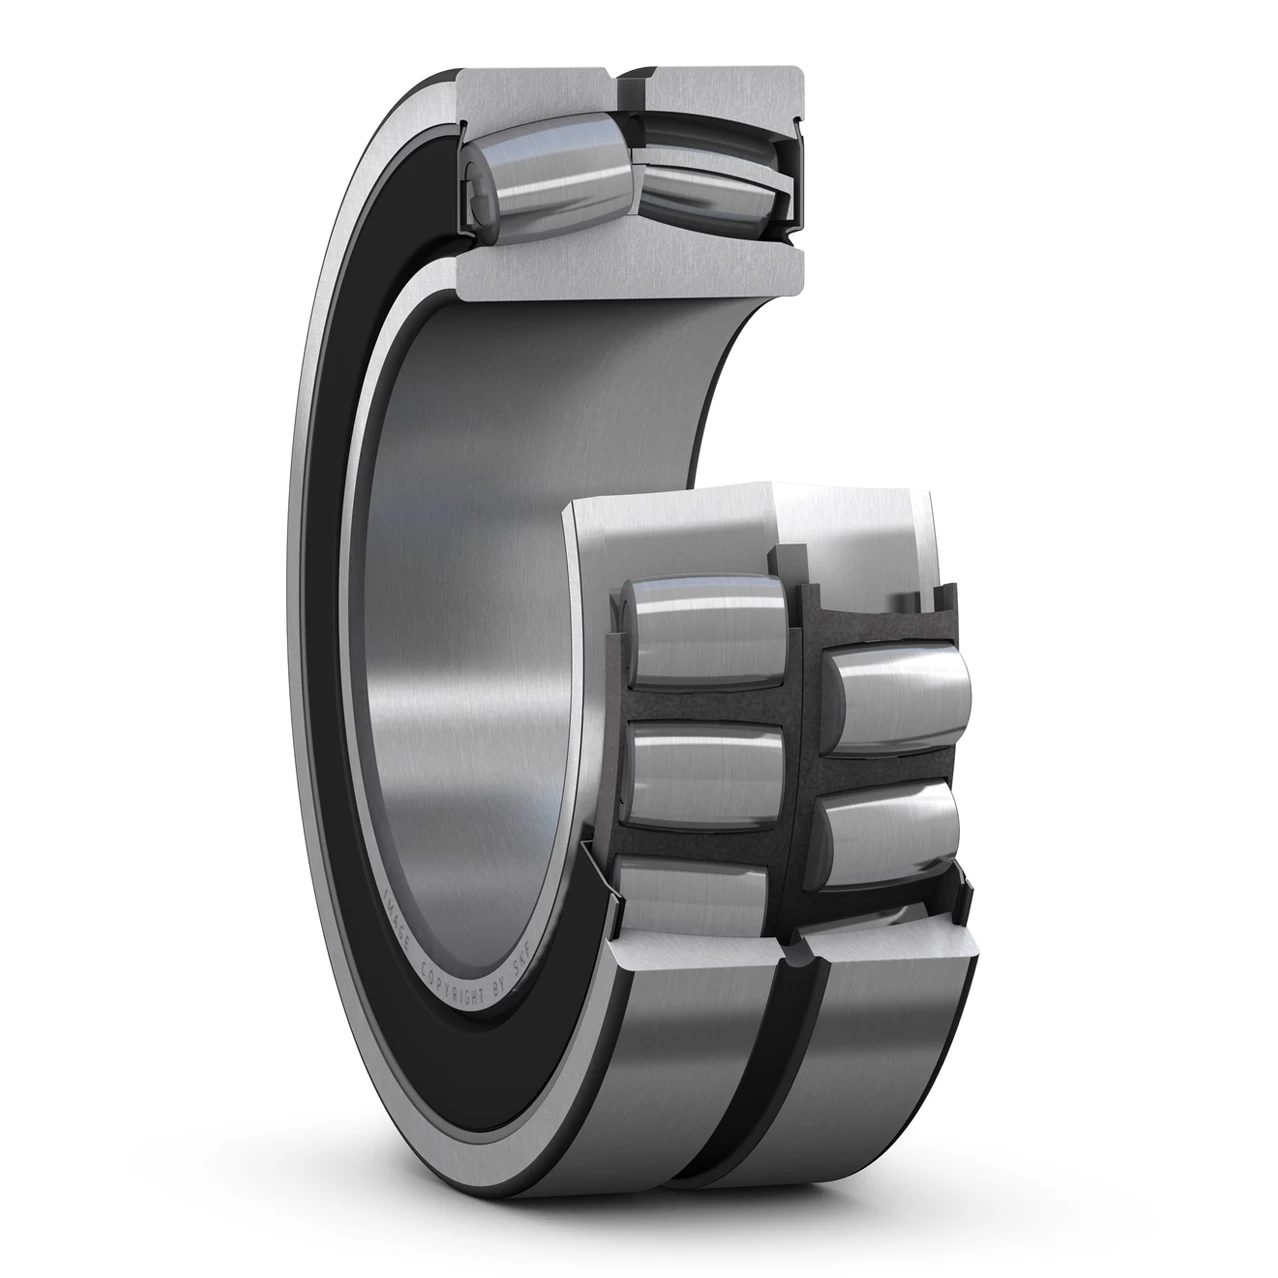 BS2-2207-2RS/VT143 SKF